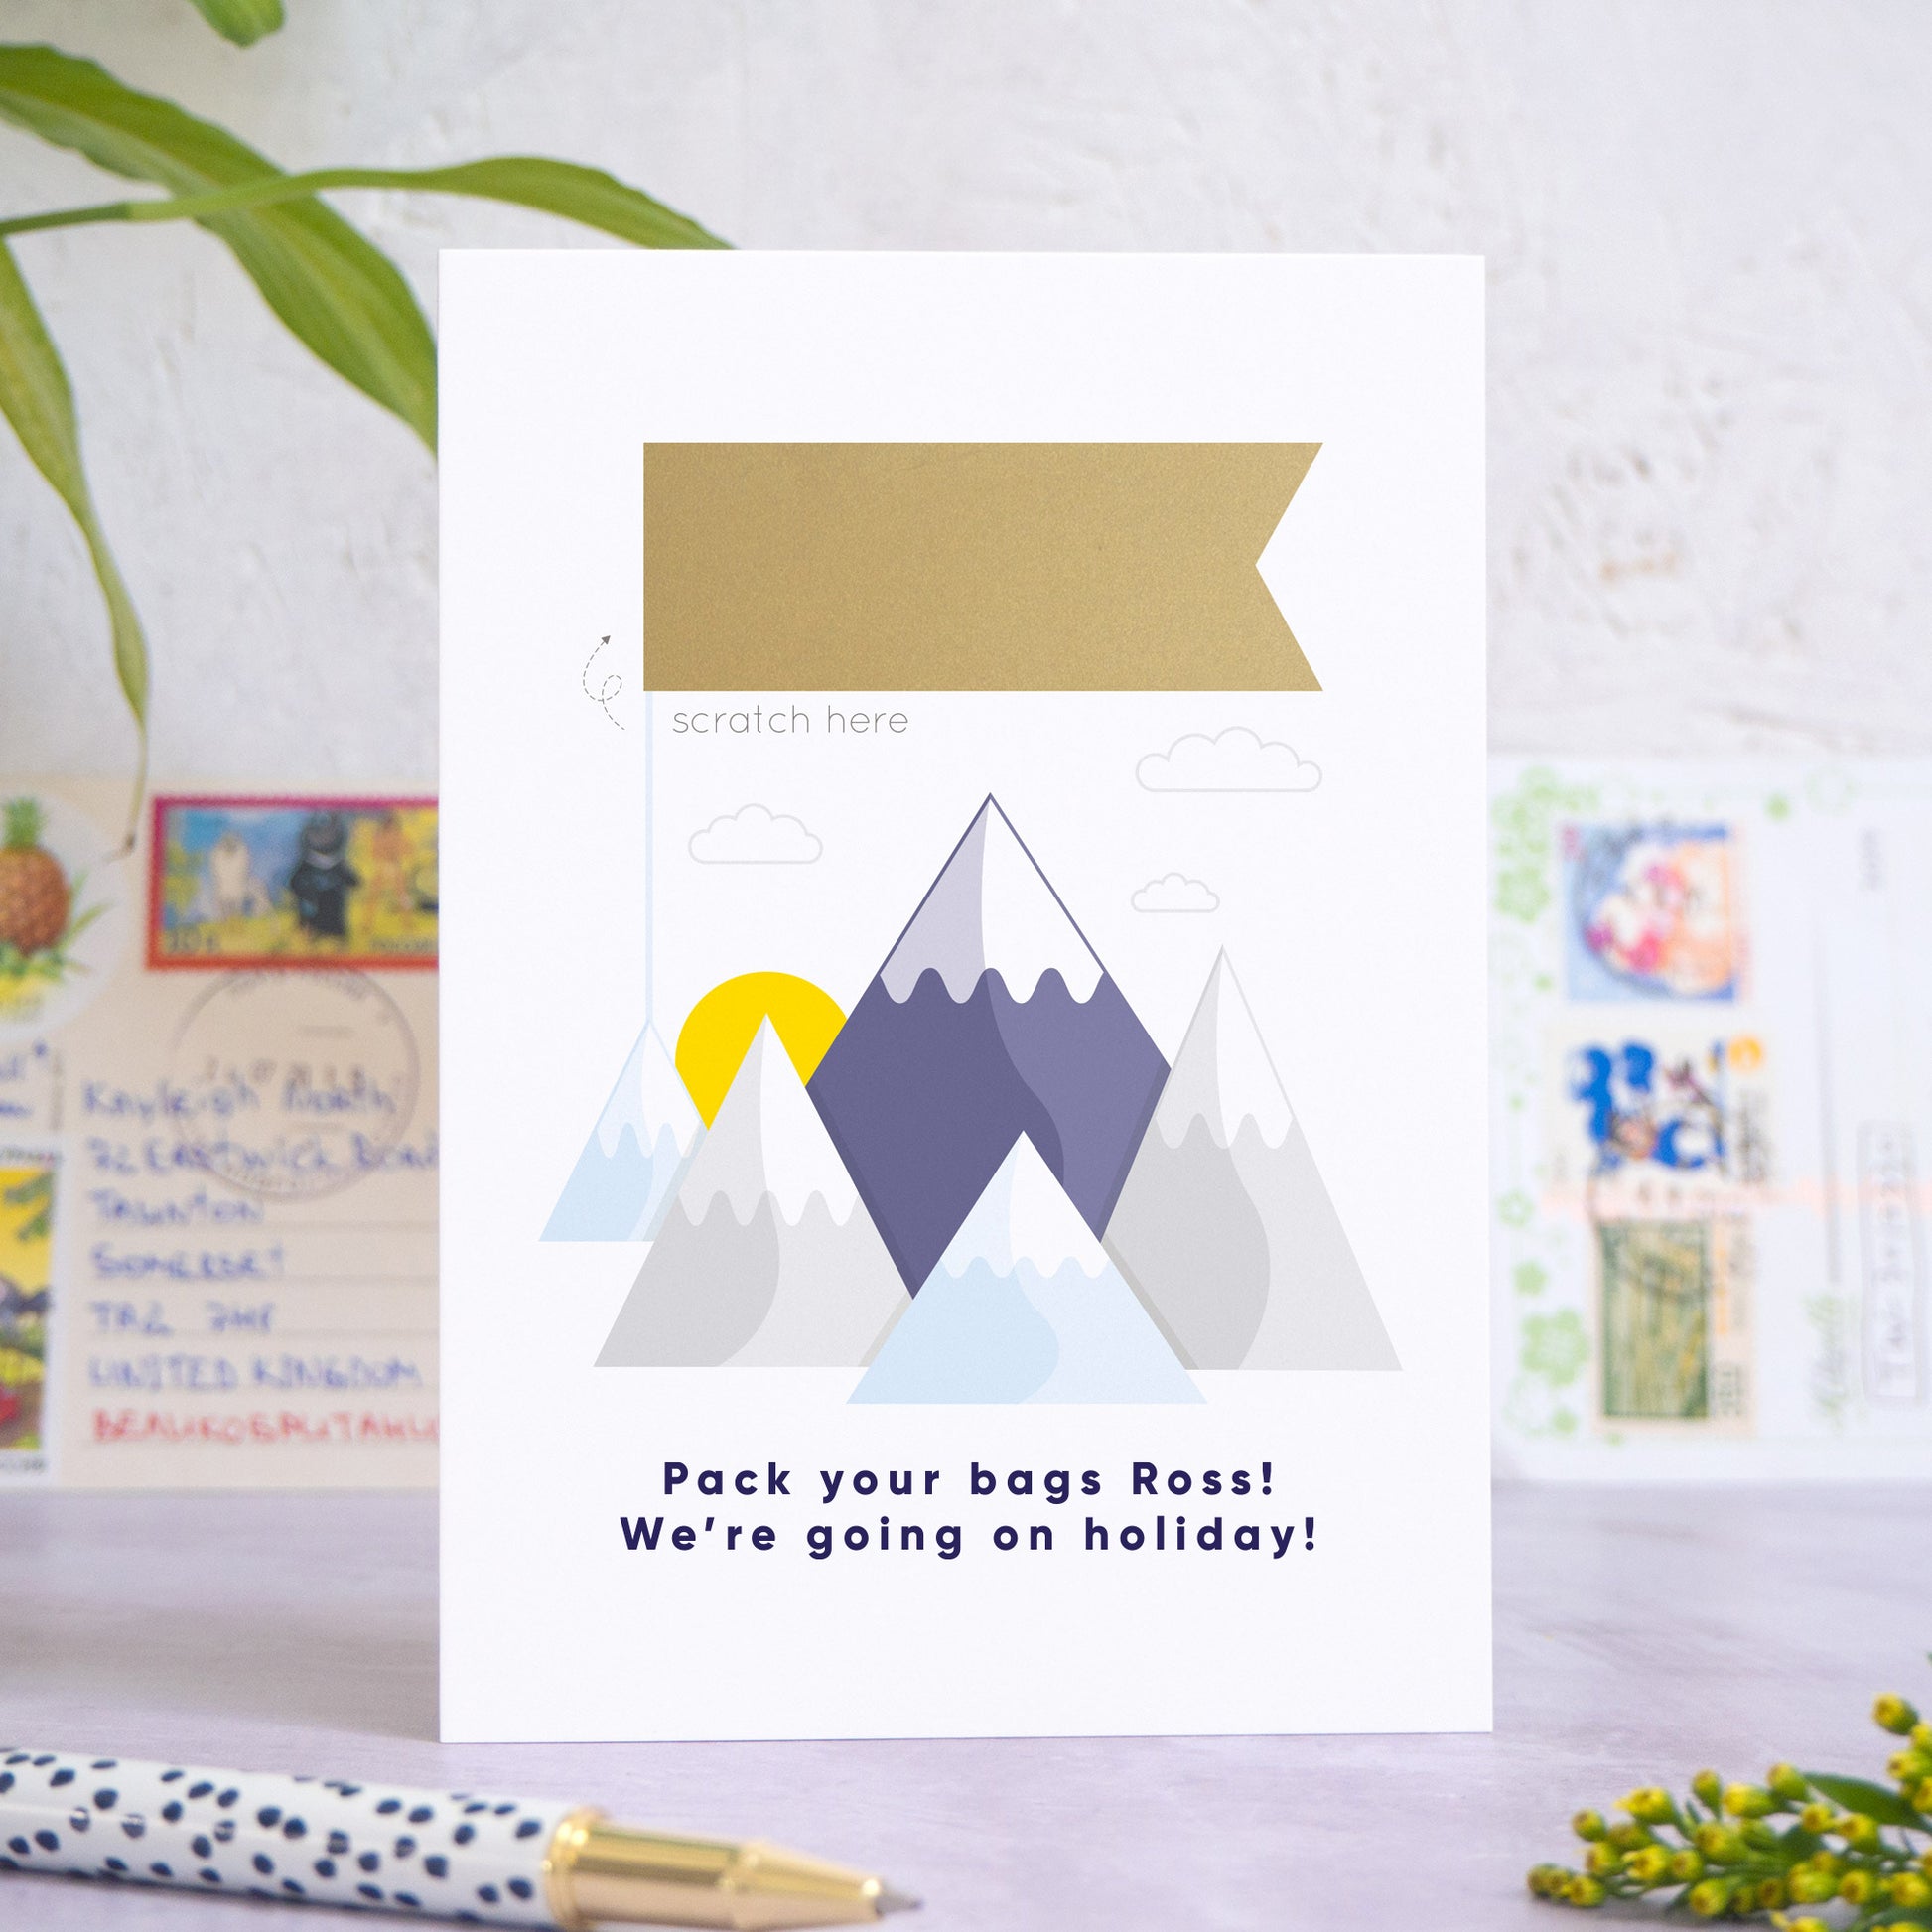 A mountain holiday reveal scratch card featuring a mountain range, with a sun peeping out behind the peaks, little clouds and a gold flag. The flag has yet to be scratched off. Beneath the mountain range reads: “Pack your bags [insert recipients name]! We're going on holiday!”. The card is standing on a grey surface with postcards in the background and a pen and foliage in the foreground.